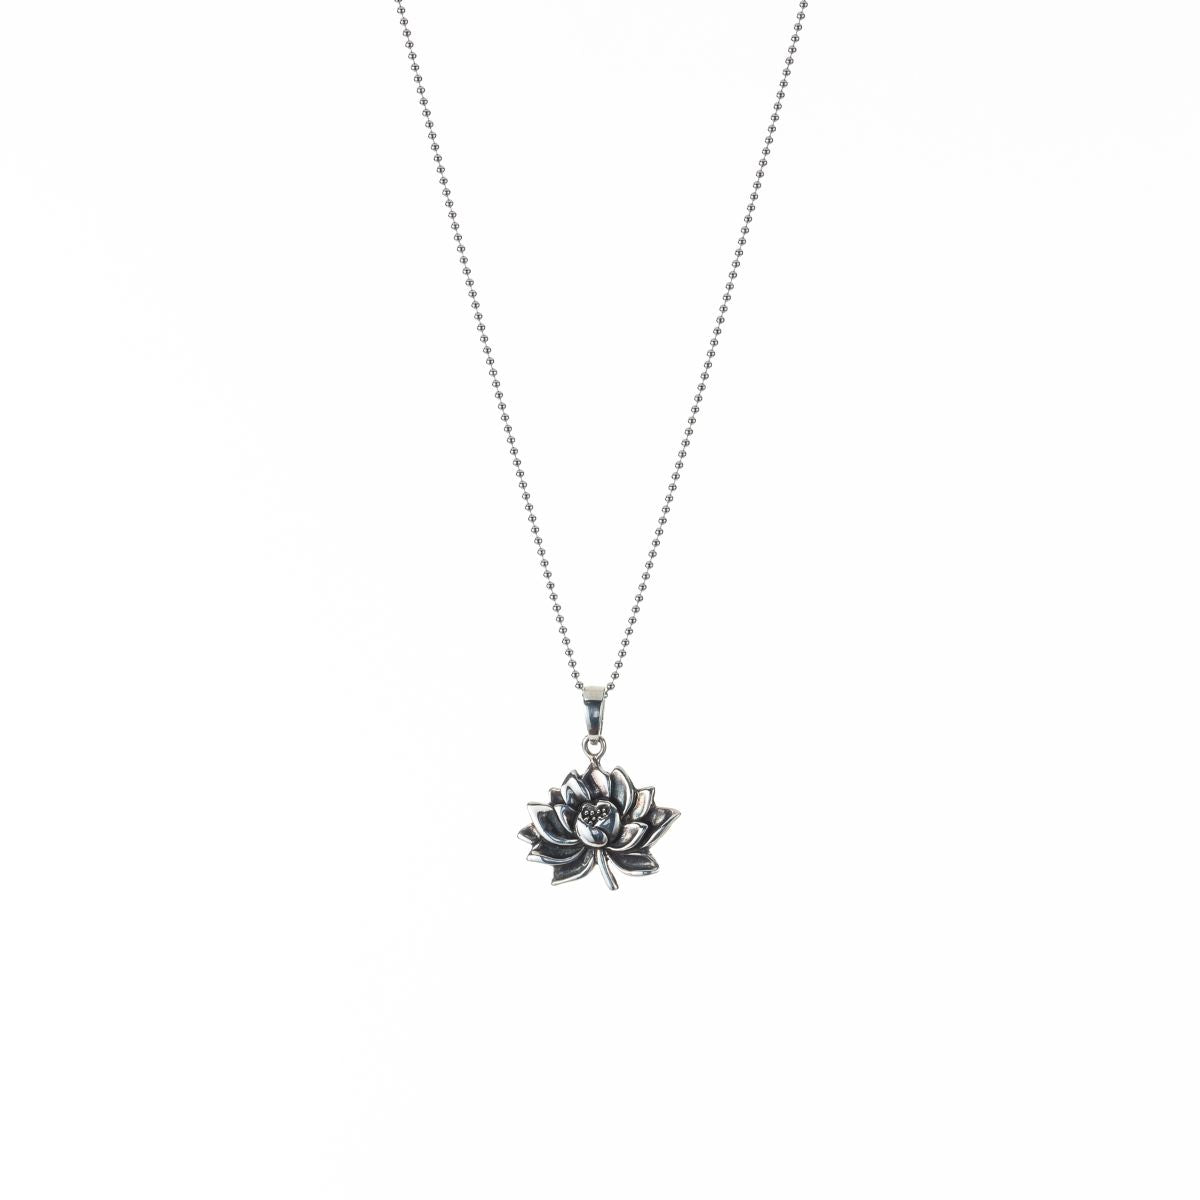 Lotus Flower Pendant Necklace in Silver